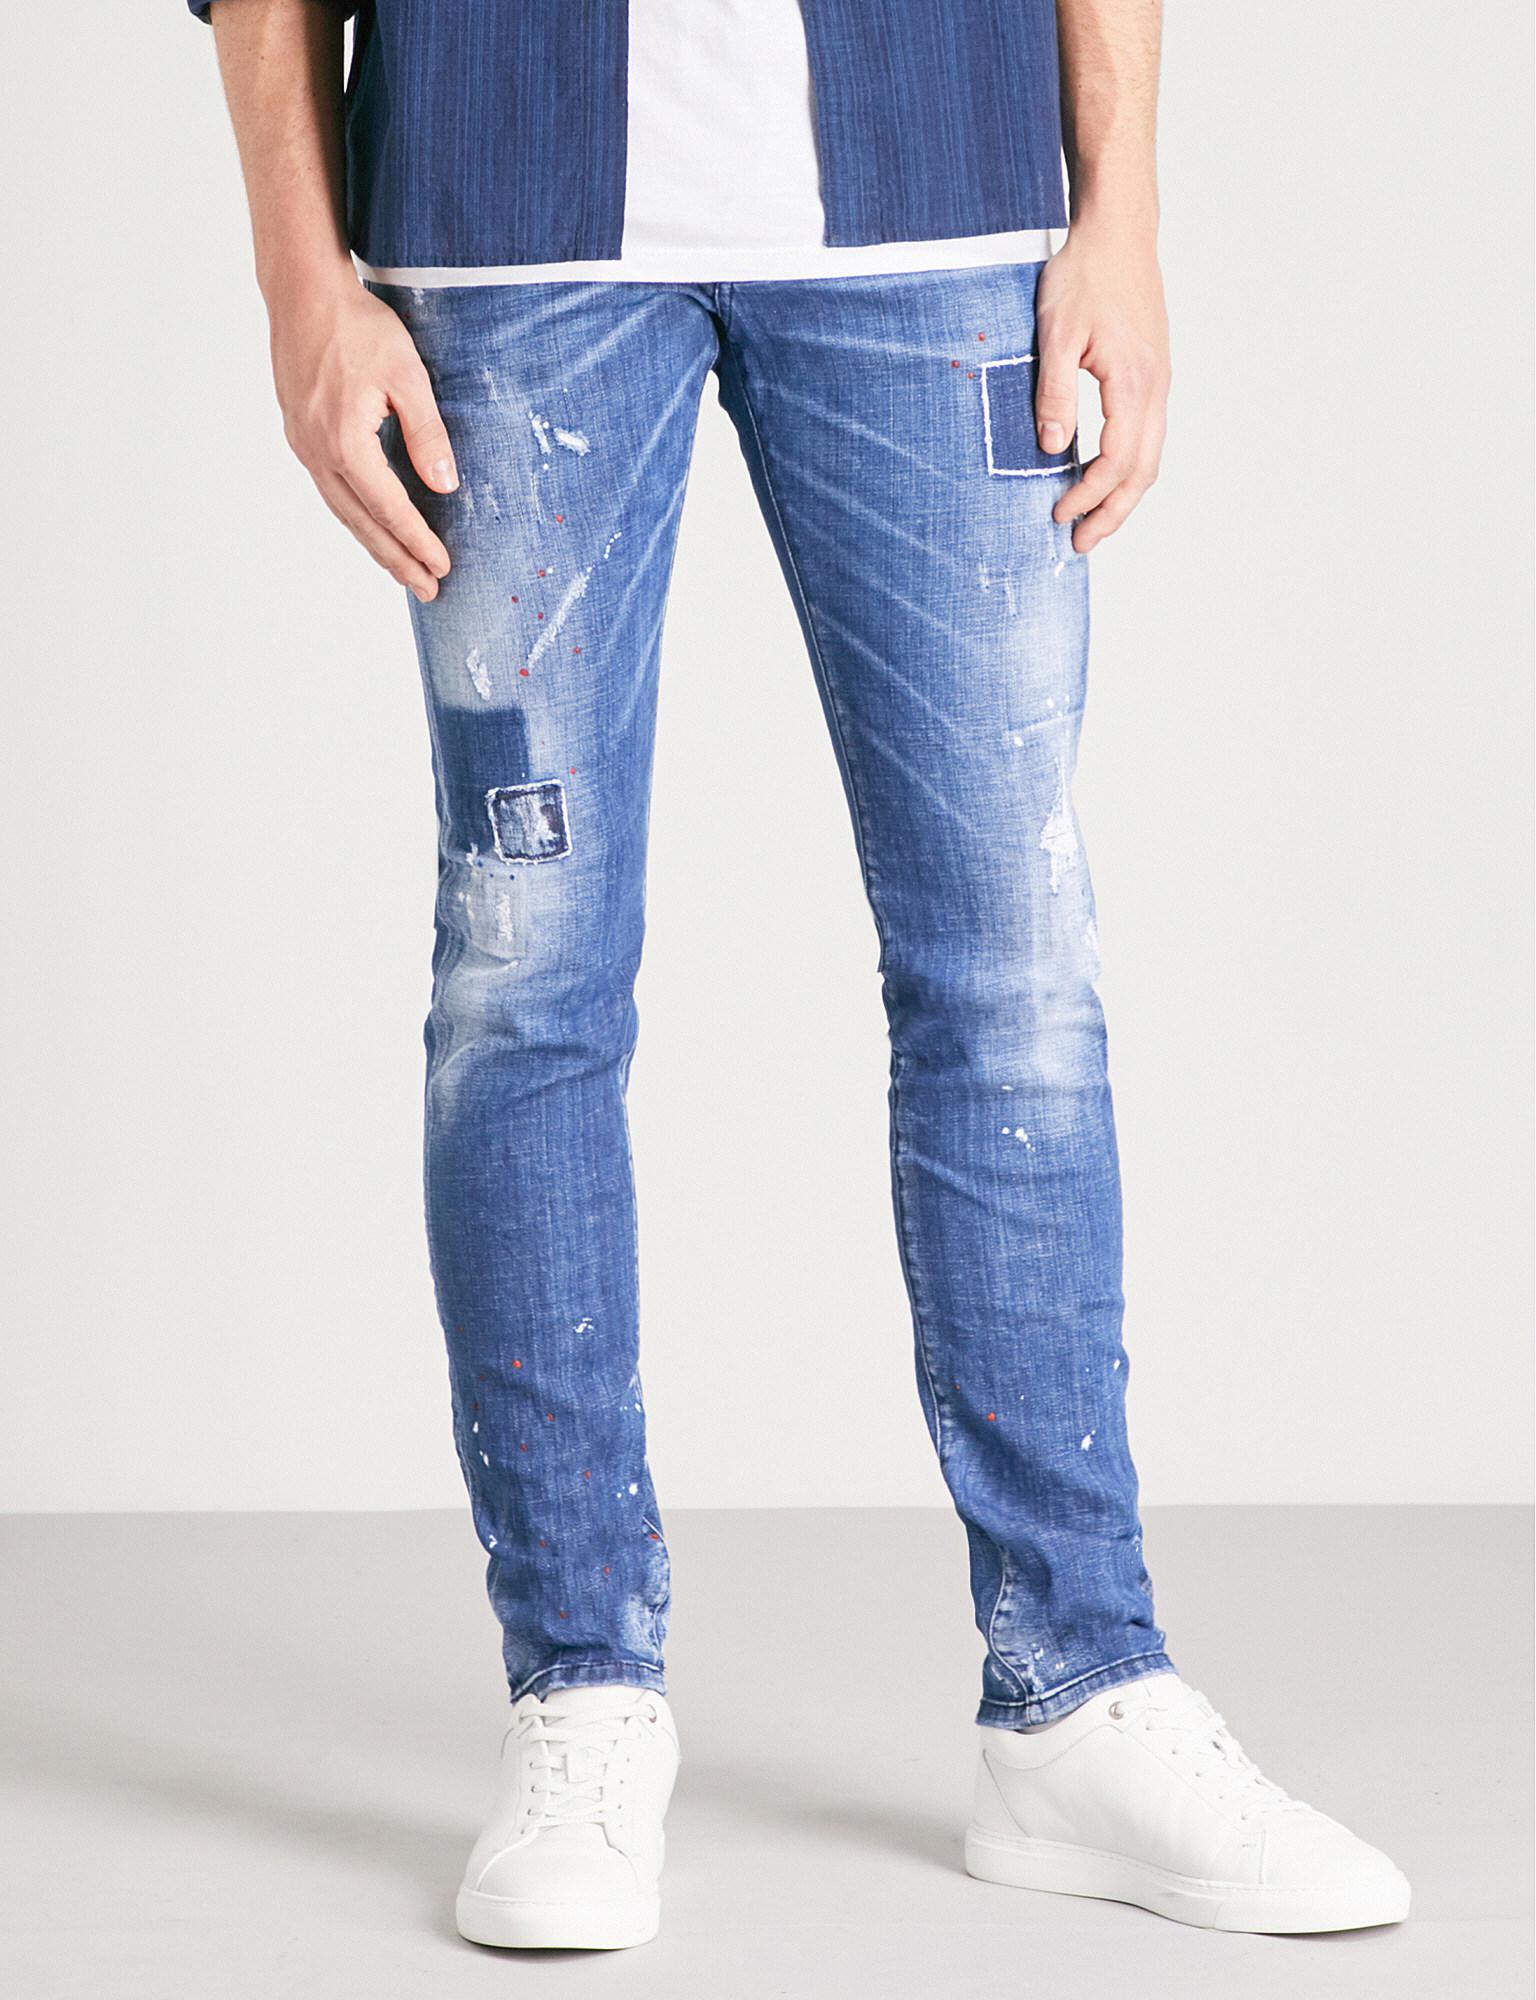 Lyst - Dsquared² Cool Guy Slim-fit Distressed Skinny Jeans in Blue for Men